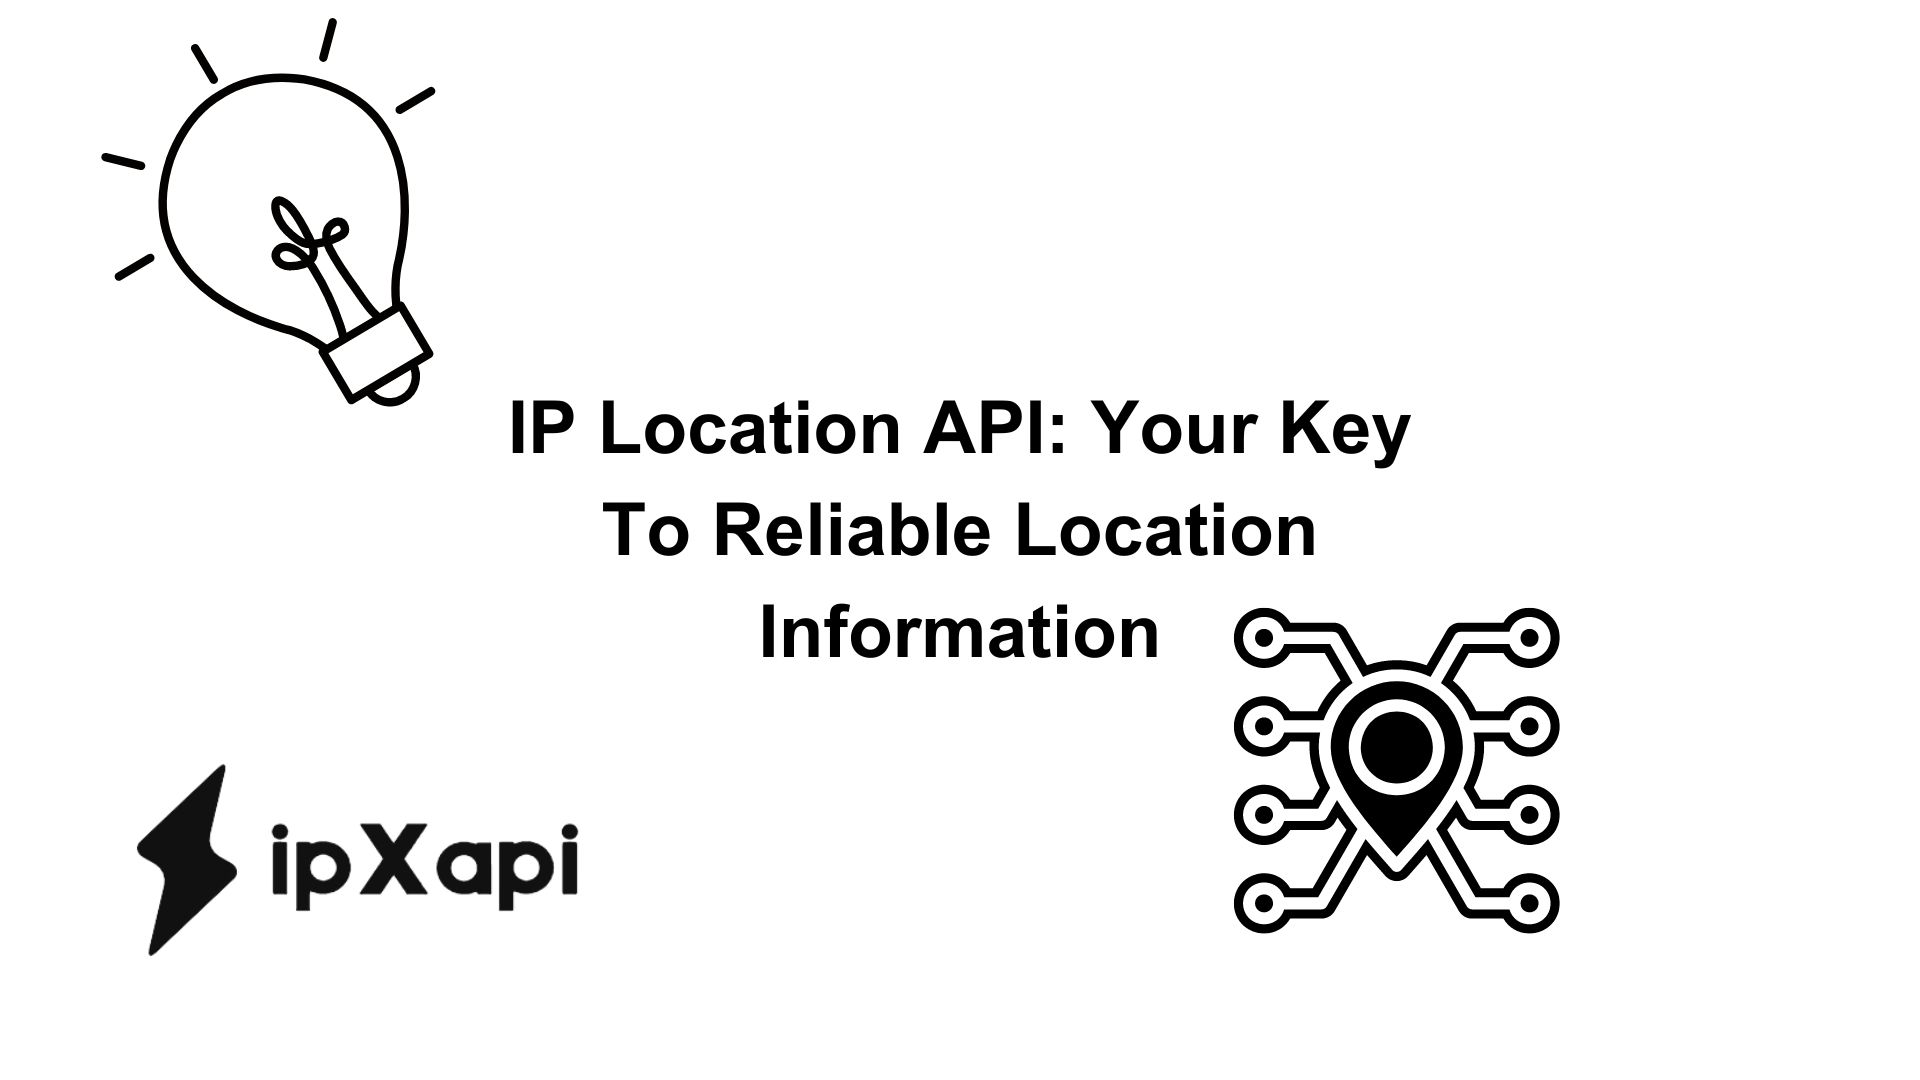 IP Location API: Your Key To Reliable Location Information